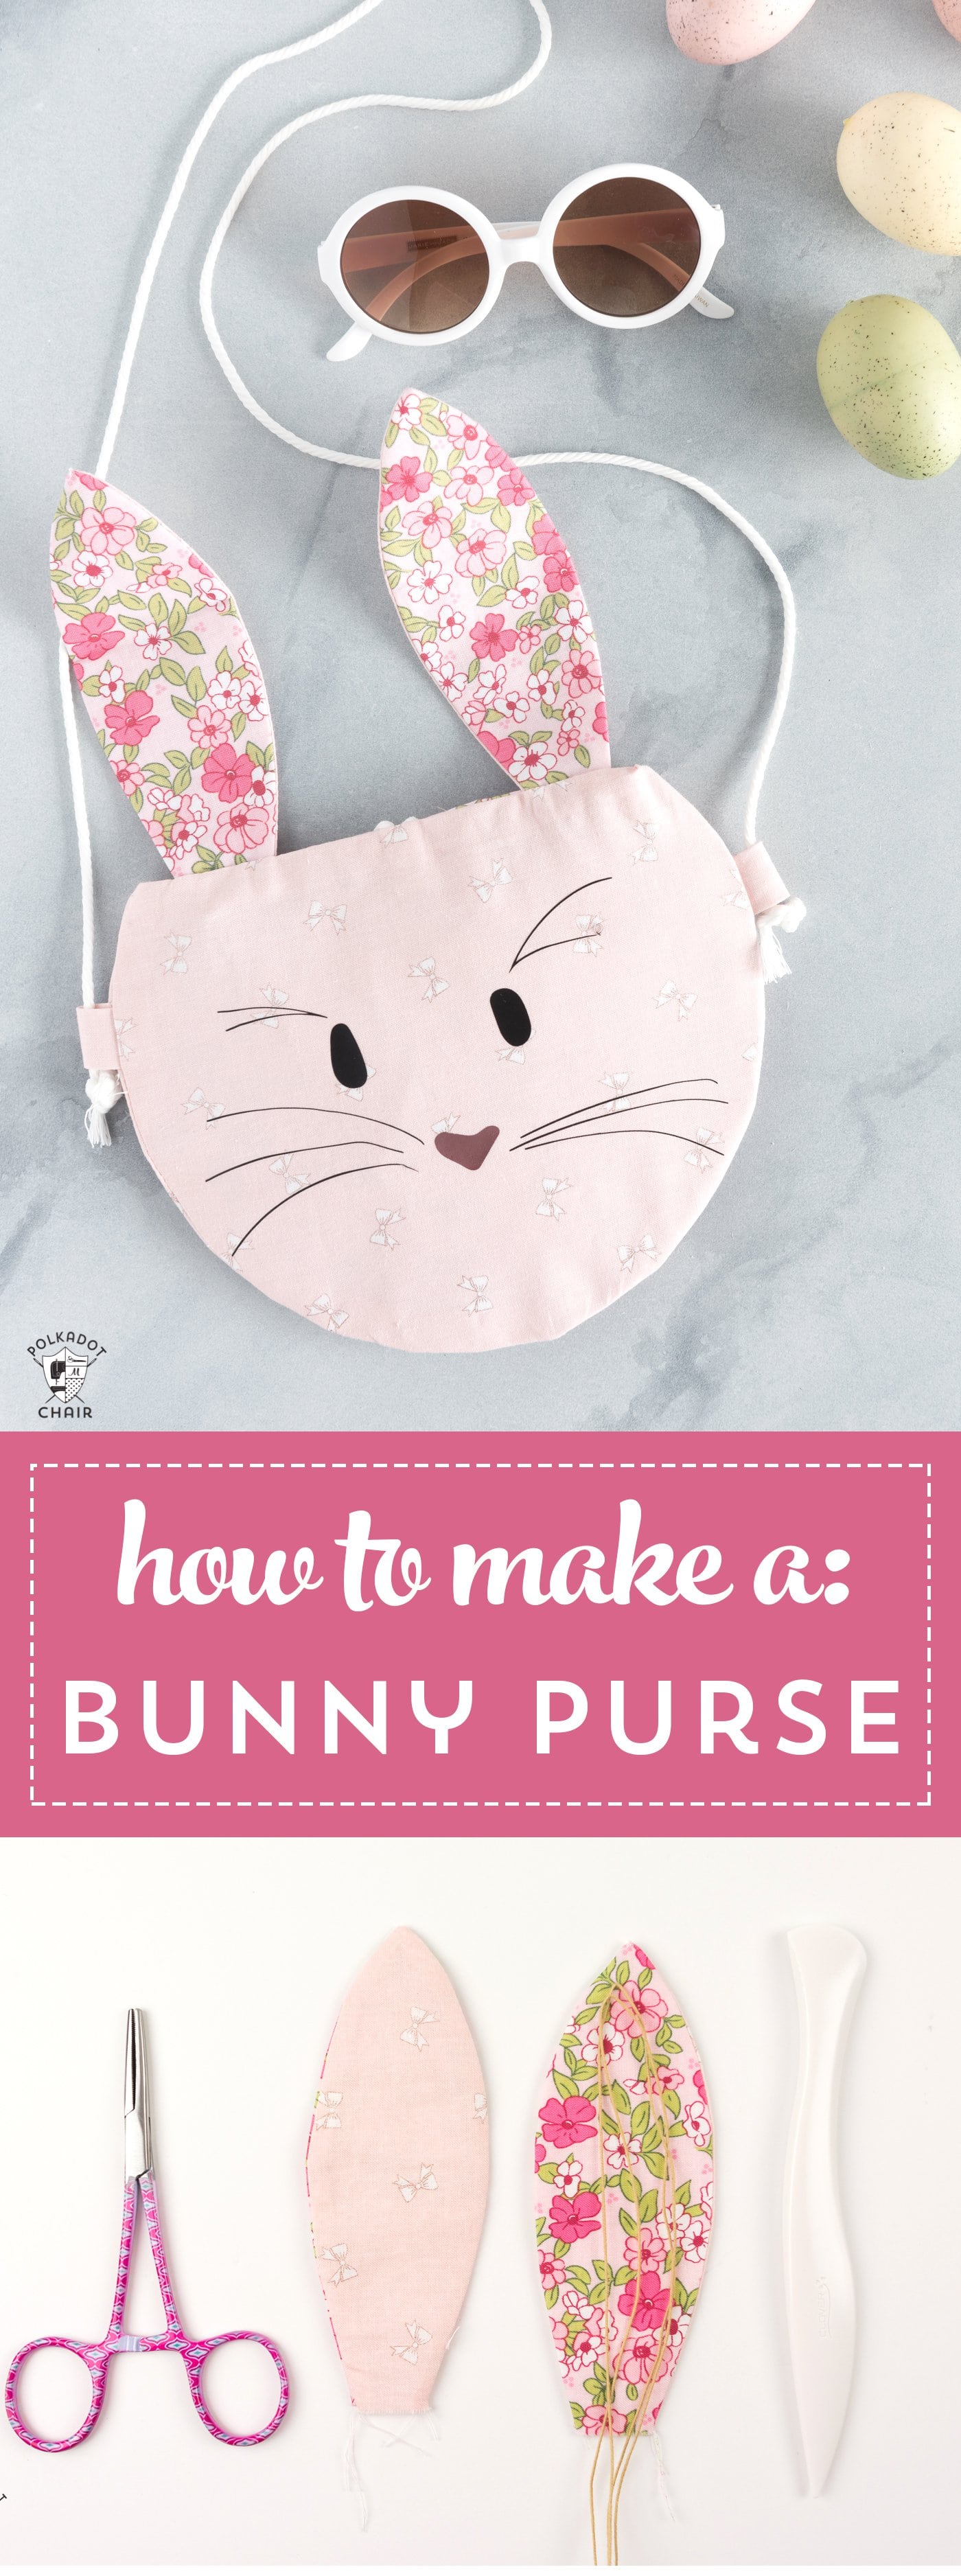 How to make a bunny purse, a free bunny sewing pattern for the Cricut Maker - cute kids purse ideas #Cricut #CricutMade #CricutMaker #BunnyPurse #BunnySewingPattern